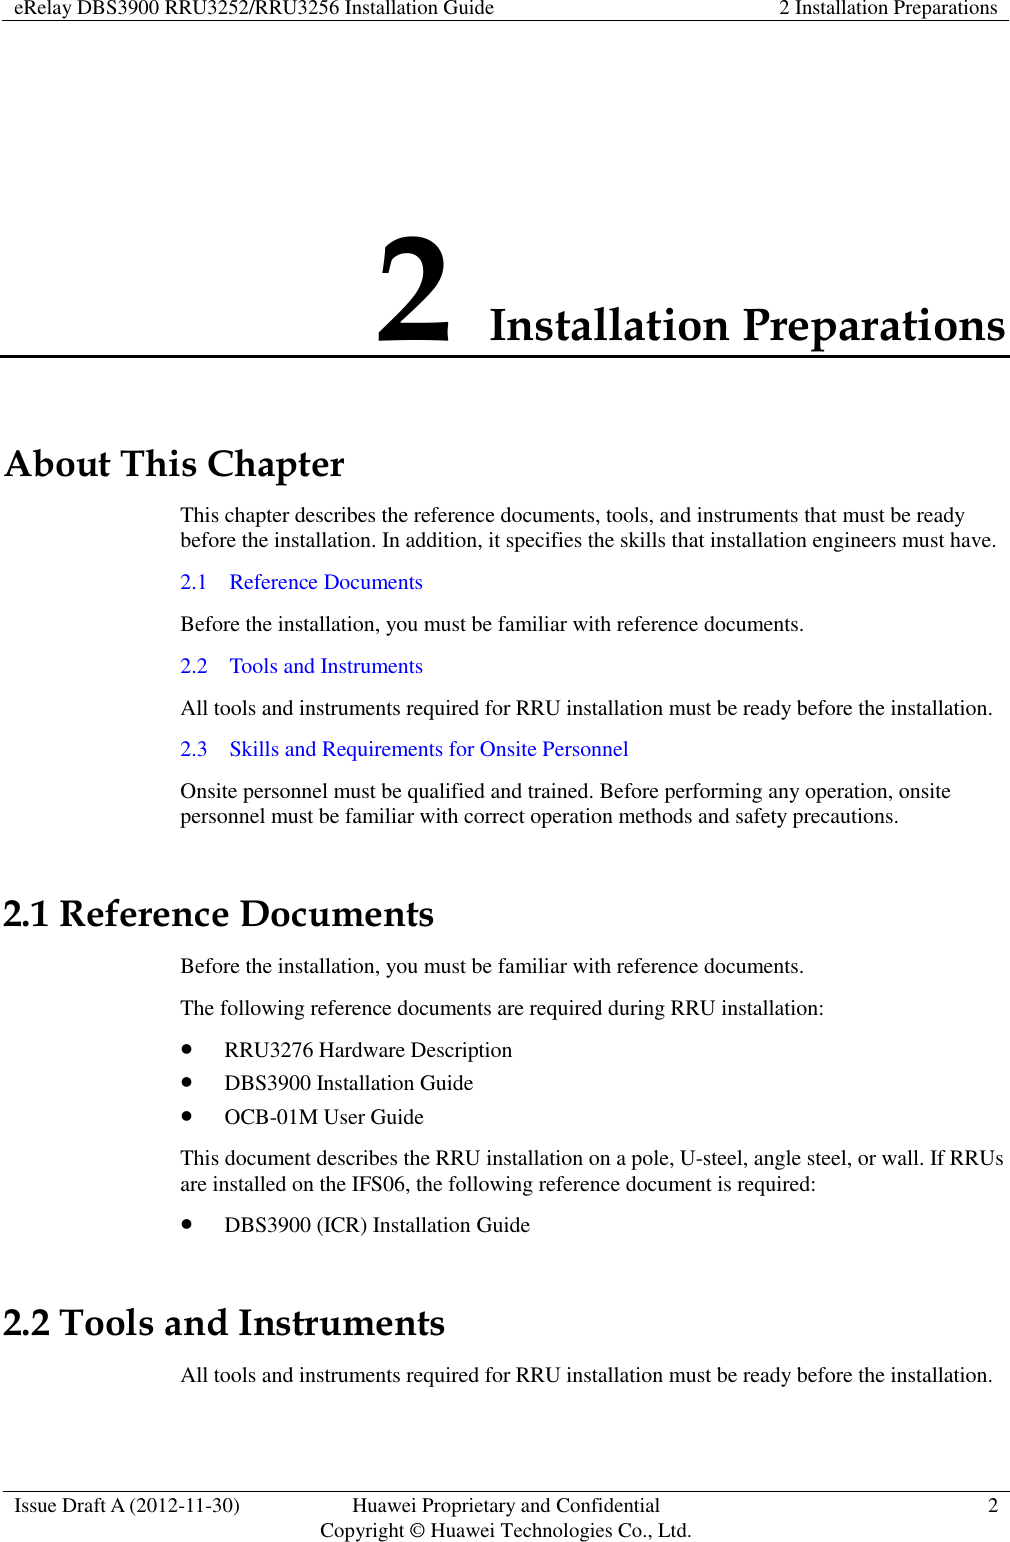 eRelay DBS3900 RRU3252/RRU3256 Installation Guide 2 Installation Preparations  Issue Draft A (2012-11-30) Huawei Proprietary and Confidential                                     Copyright © Huawei Technologies Co., Ltd. 2  2 Installation Preparations About This Chapter This chapter describes the reference documents, tools, and instruments that must be ready before the installation. In addition, it specifies the skills that installation engineers must have.   2.1    Reference Documents Before the installation, you must be familiar with reference documents. 2.2    Tools and Instruments All tools and instruments required for RRU installation must be ready before the installation.   2.3    Skills and Requirements for Onsite Personnel Onsite personnel must be qualified and trained. Before performing any operation, onsite personnel must be familiar with correct operation methods and safety precautions. 2.1 Reference Documents Before the installation, you must be familiar with reference documents. The following reference documents are required during RRU installation:  RRU3276 Hardware Description  DBS3900 Installation Guide  OCB-01M User Guide This document describes the RRU installation on a pole, U-steel, angle steel, or wall. If RRUs are installed on the IFS06, the following reference document is required:  DBS3900 (ICR) Installation Guide 2.2 Tools and Instruments All tools and instruments required for RRU installation must be ready before the installation.   